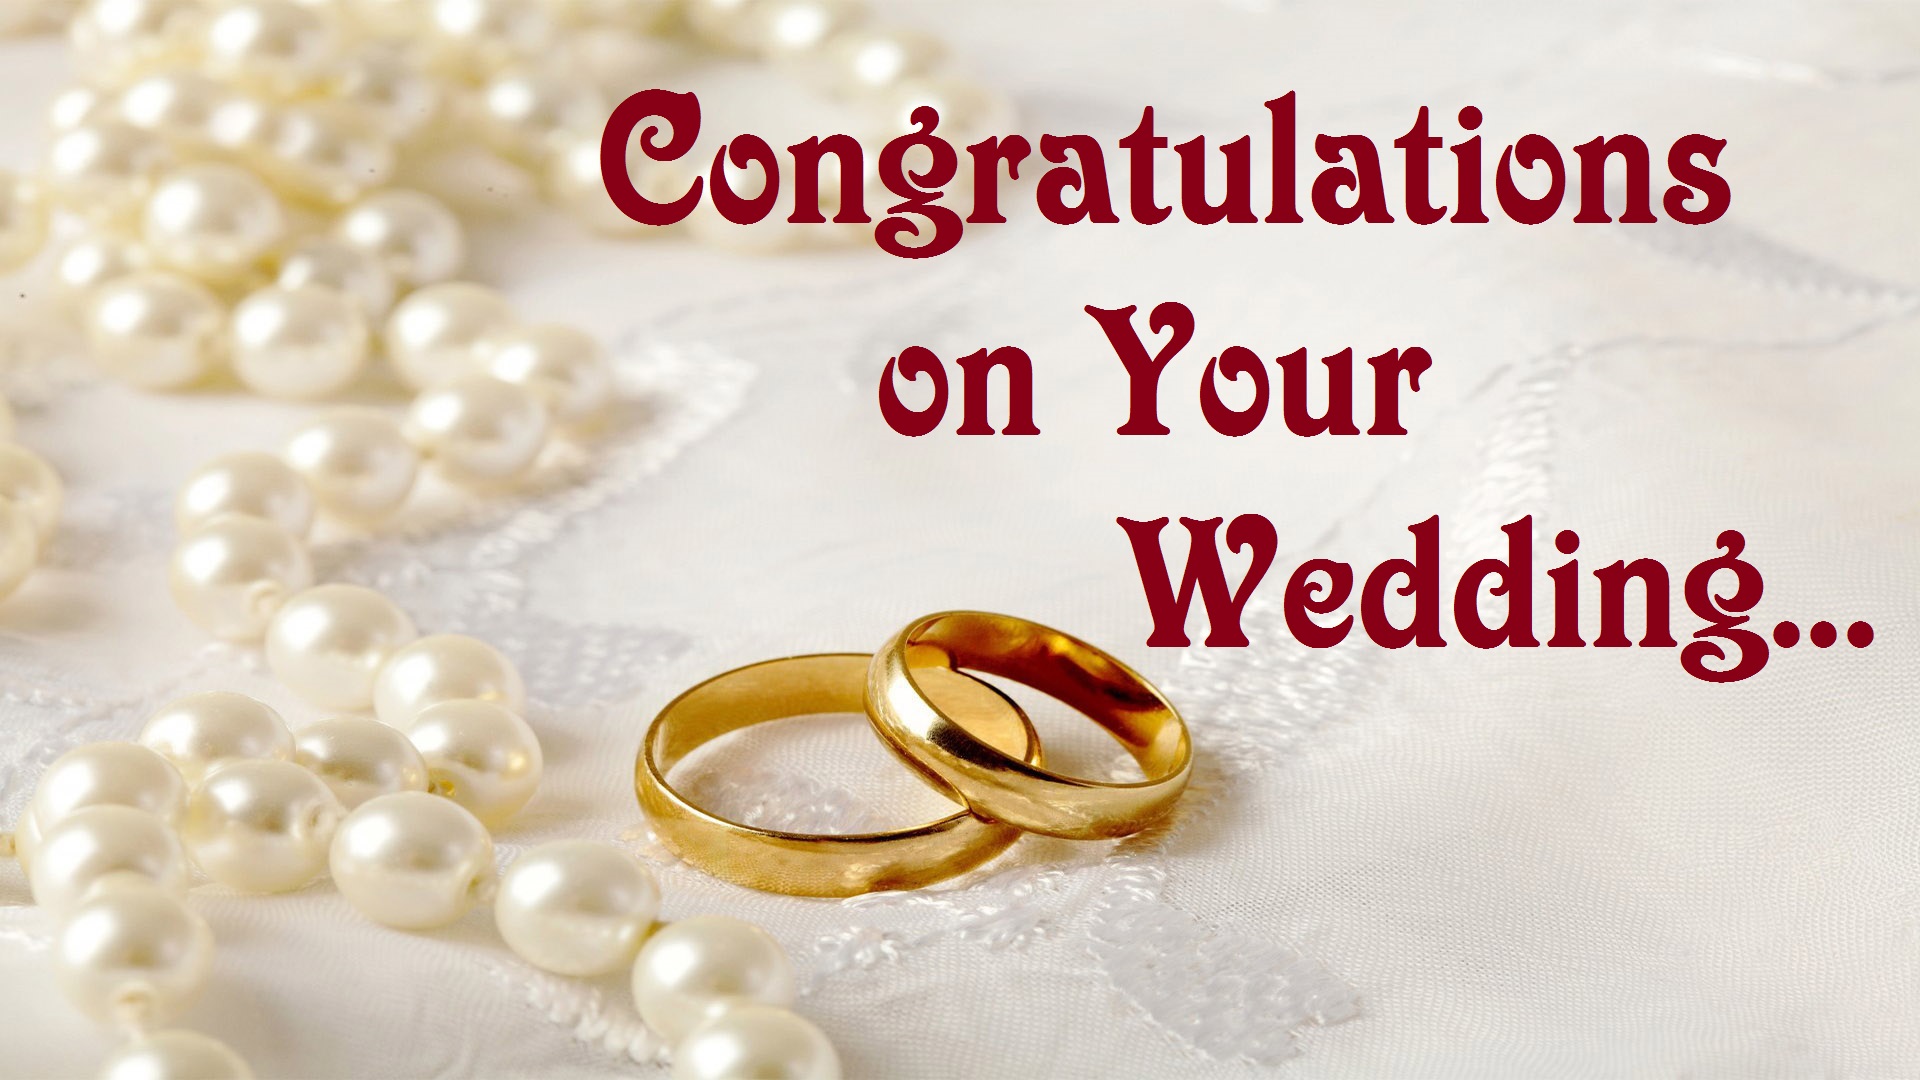 Wedding Congratulations Images & HD Pictures Wedding Greeting Cards